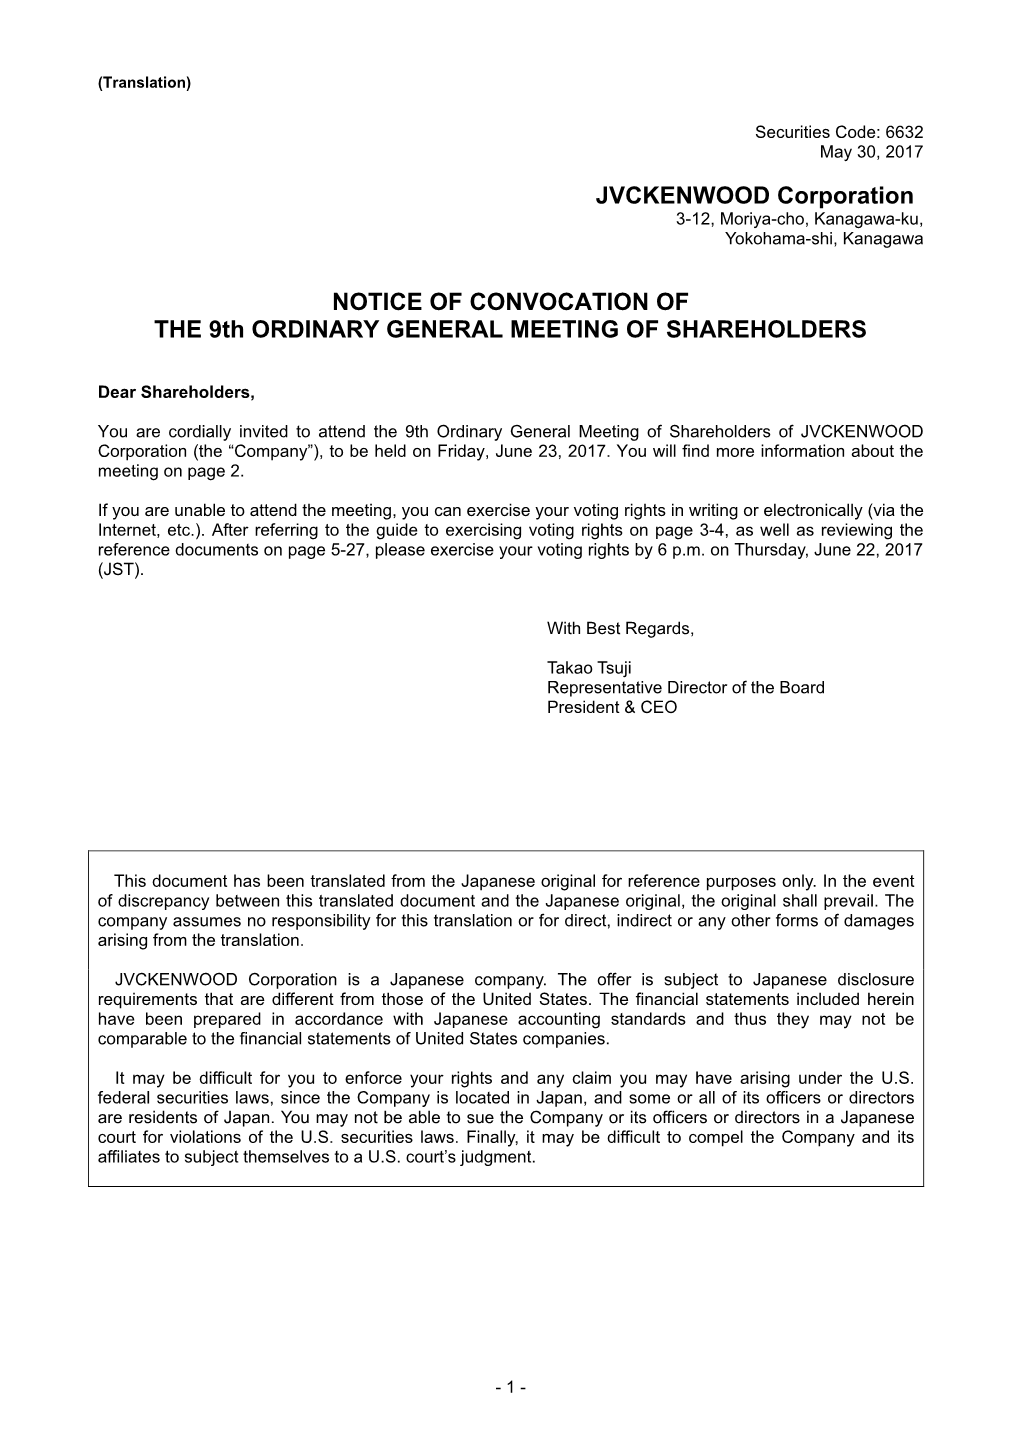 JVCKENWOOD Corporation NOTICE of CONVOCATION of the 9Th